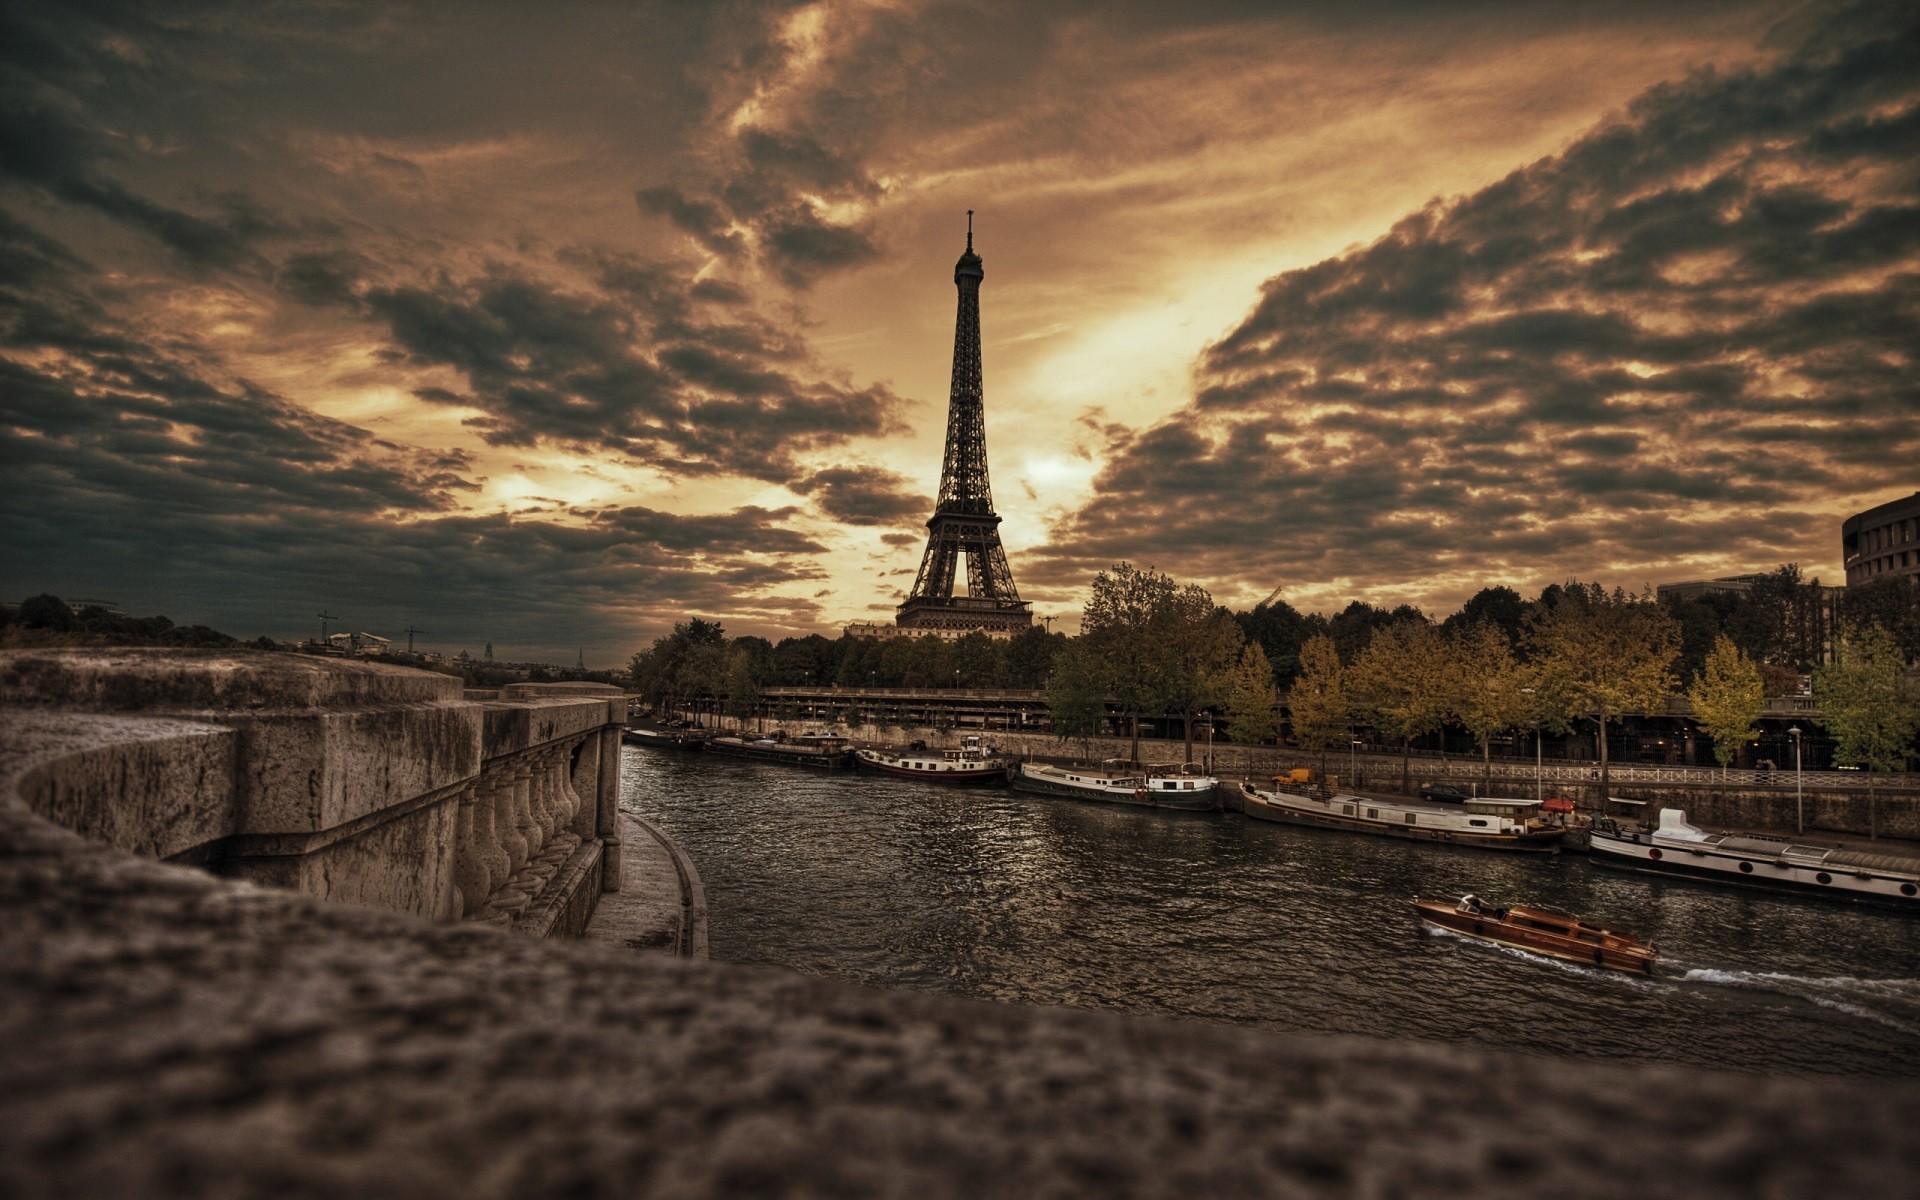 General 1920x1200 city Paris France Eiffel Tower river clouds overcast sunset boat